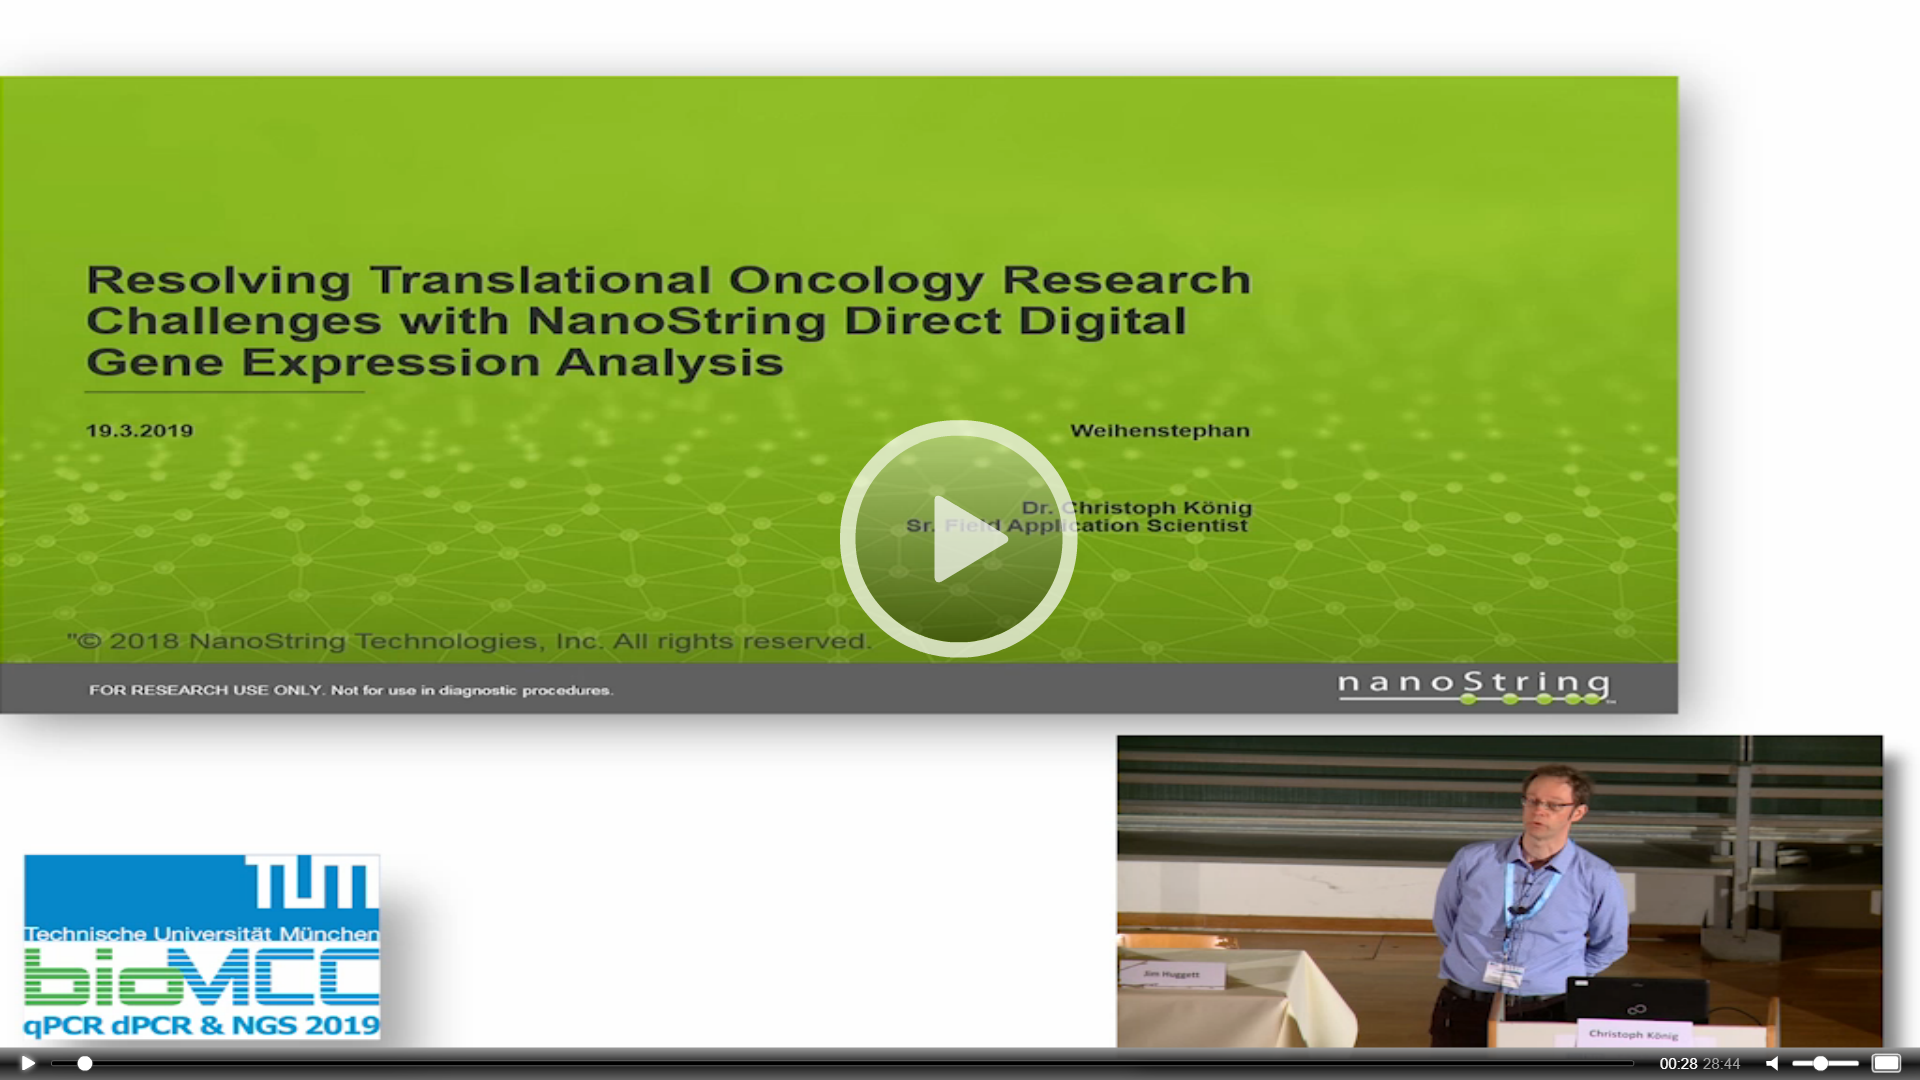 Resolving Translational Oncology Research Challenges with NanoString Direct Digital Gene Expression Analysis